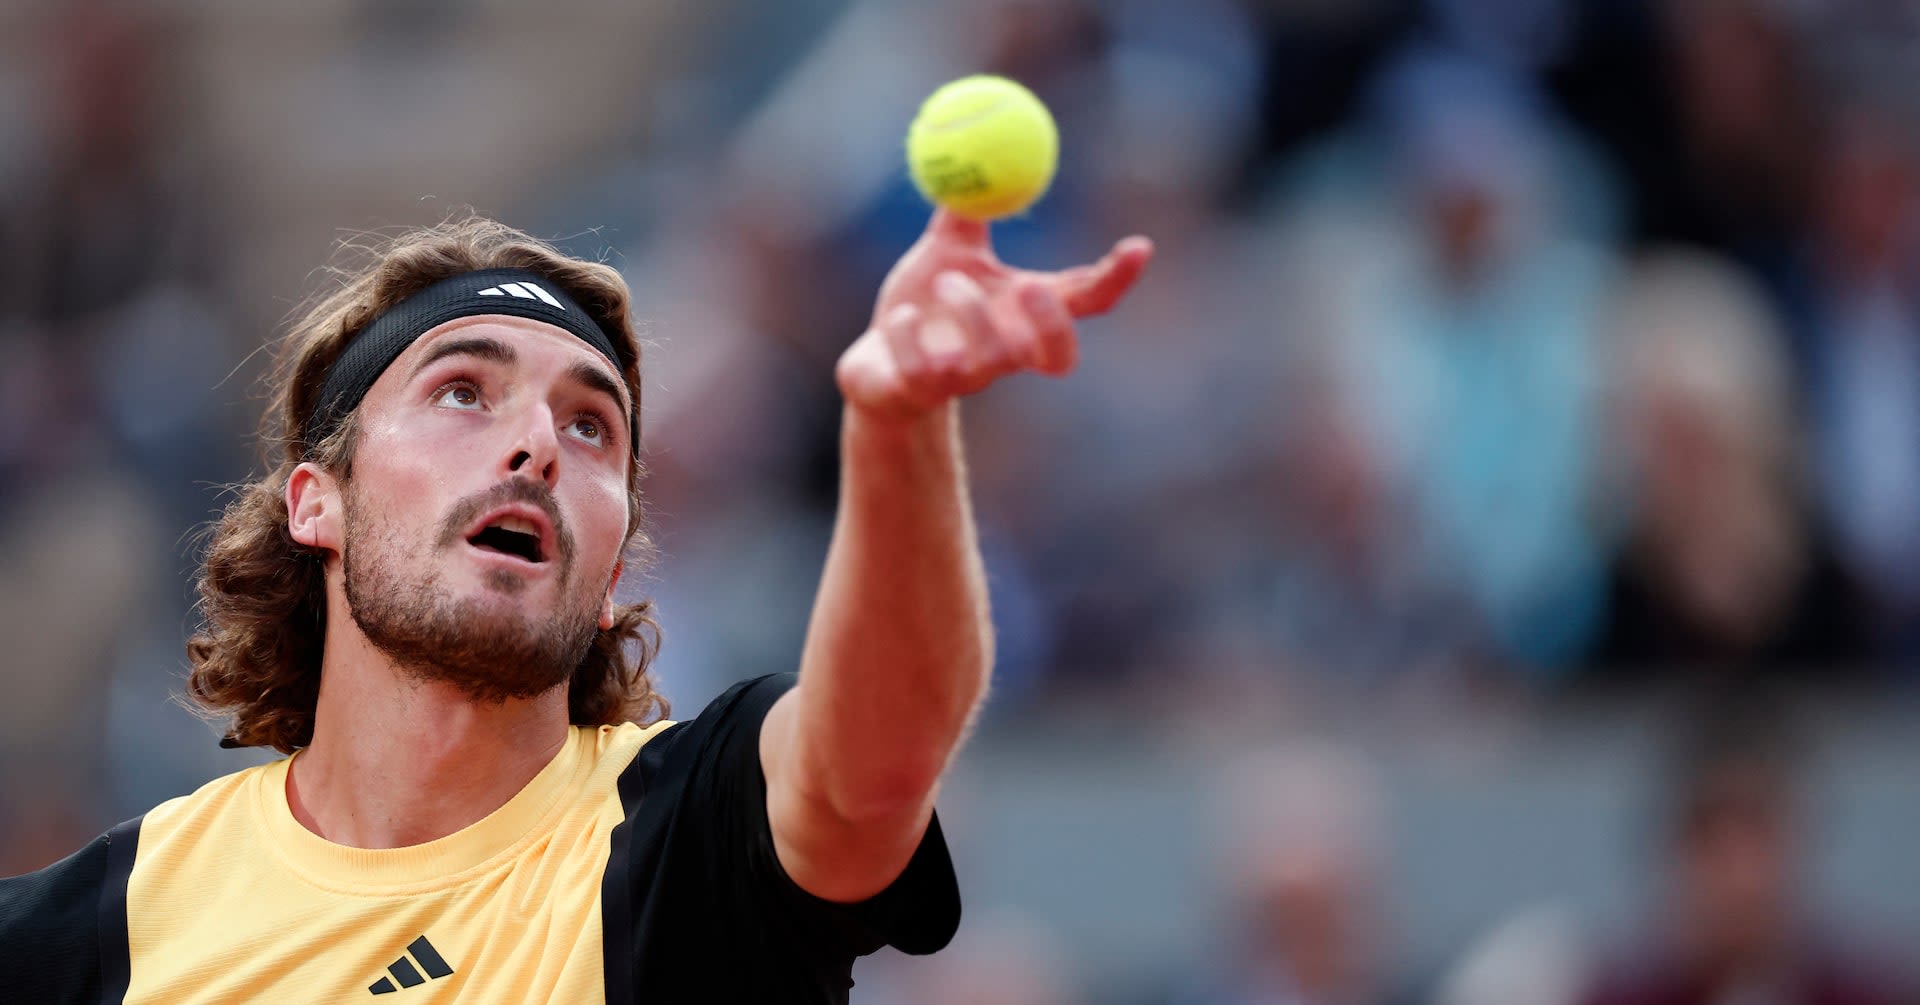 Greece's Tsitsipas keen on completing childhood dream at Paris Games